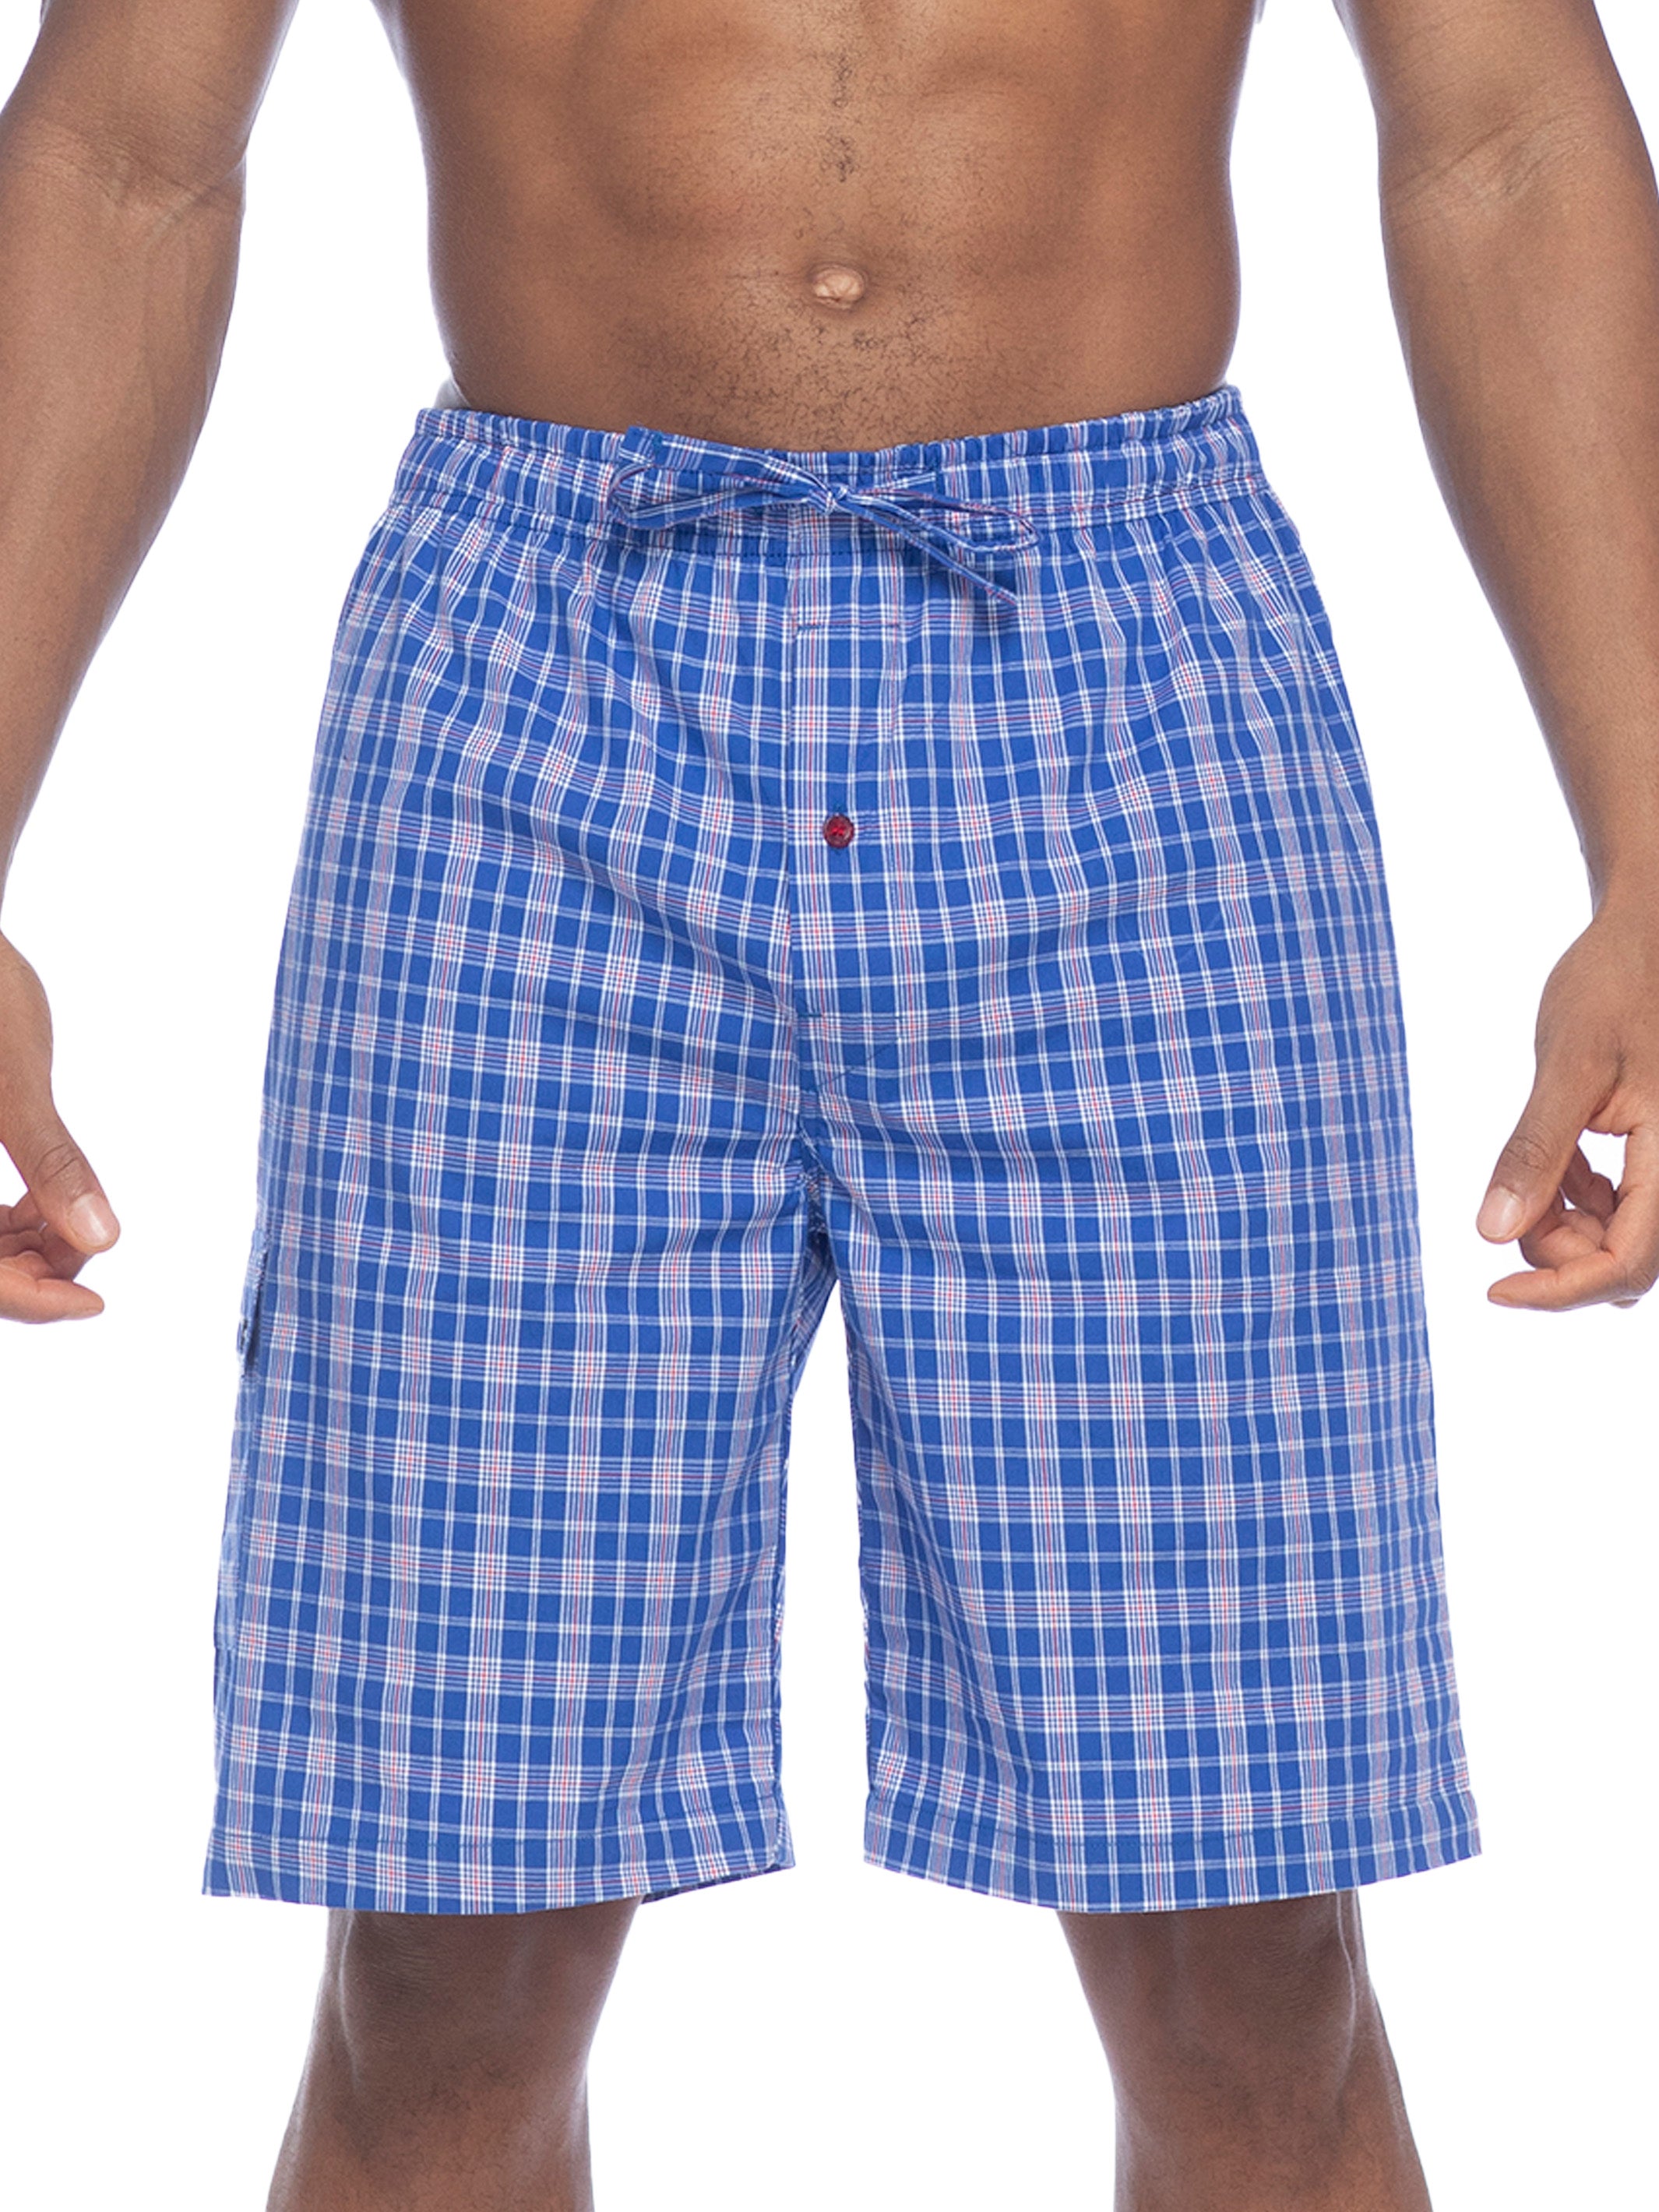 Men's Covered Waistband Flannel Pants